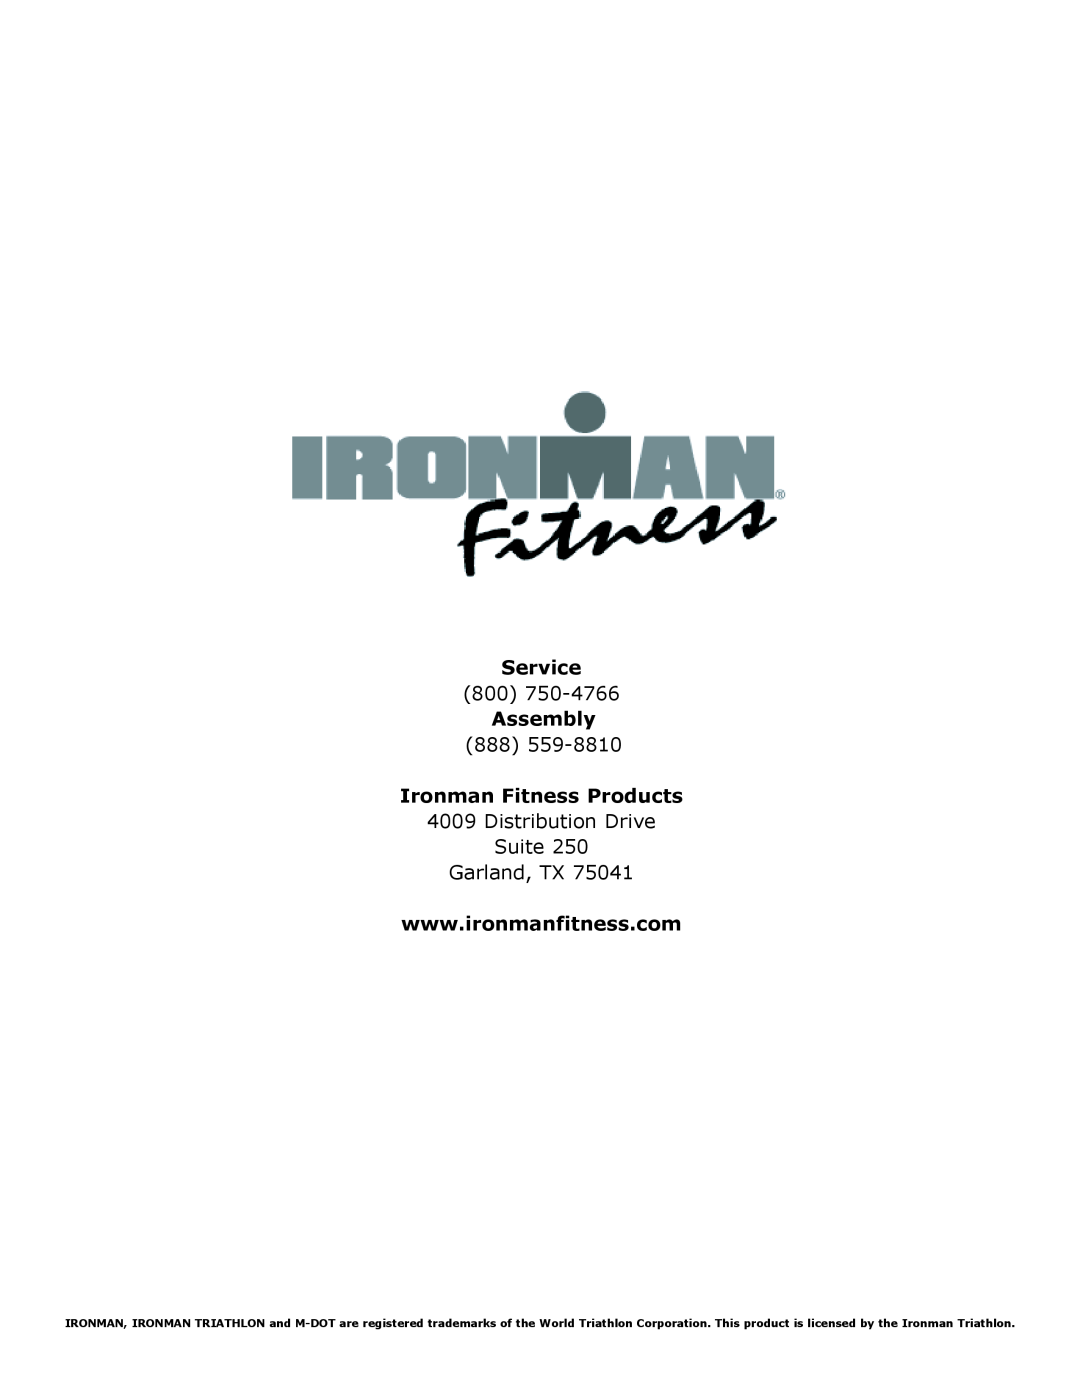 Ironman Fitness Envision owner manual Service, Assembly, Ironman Fitness Products 